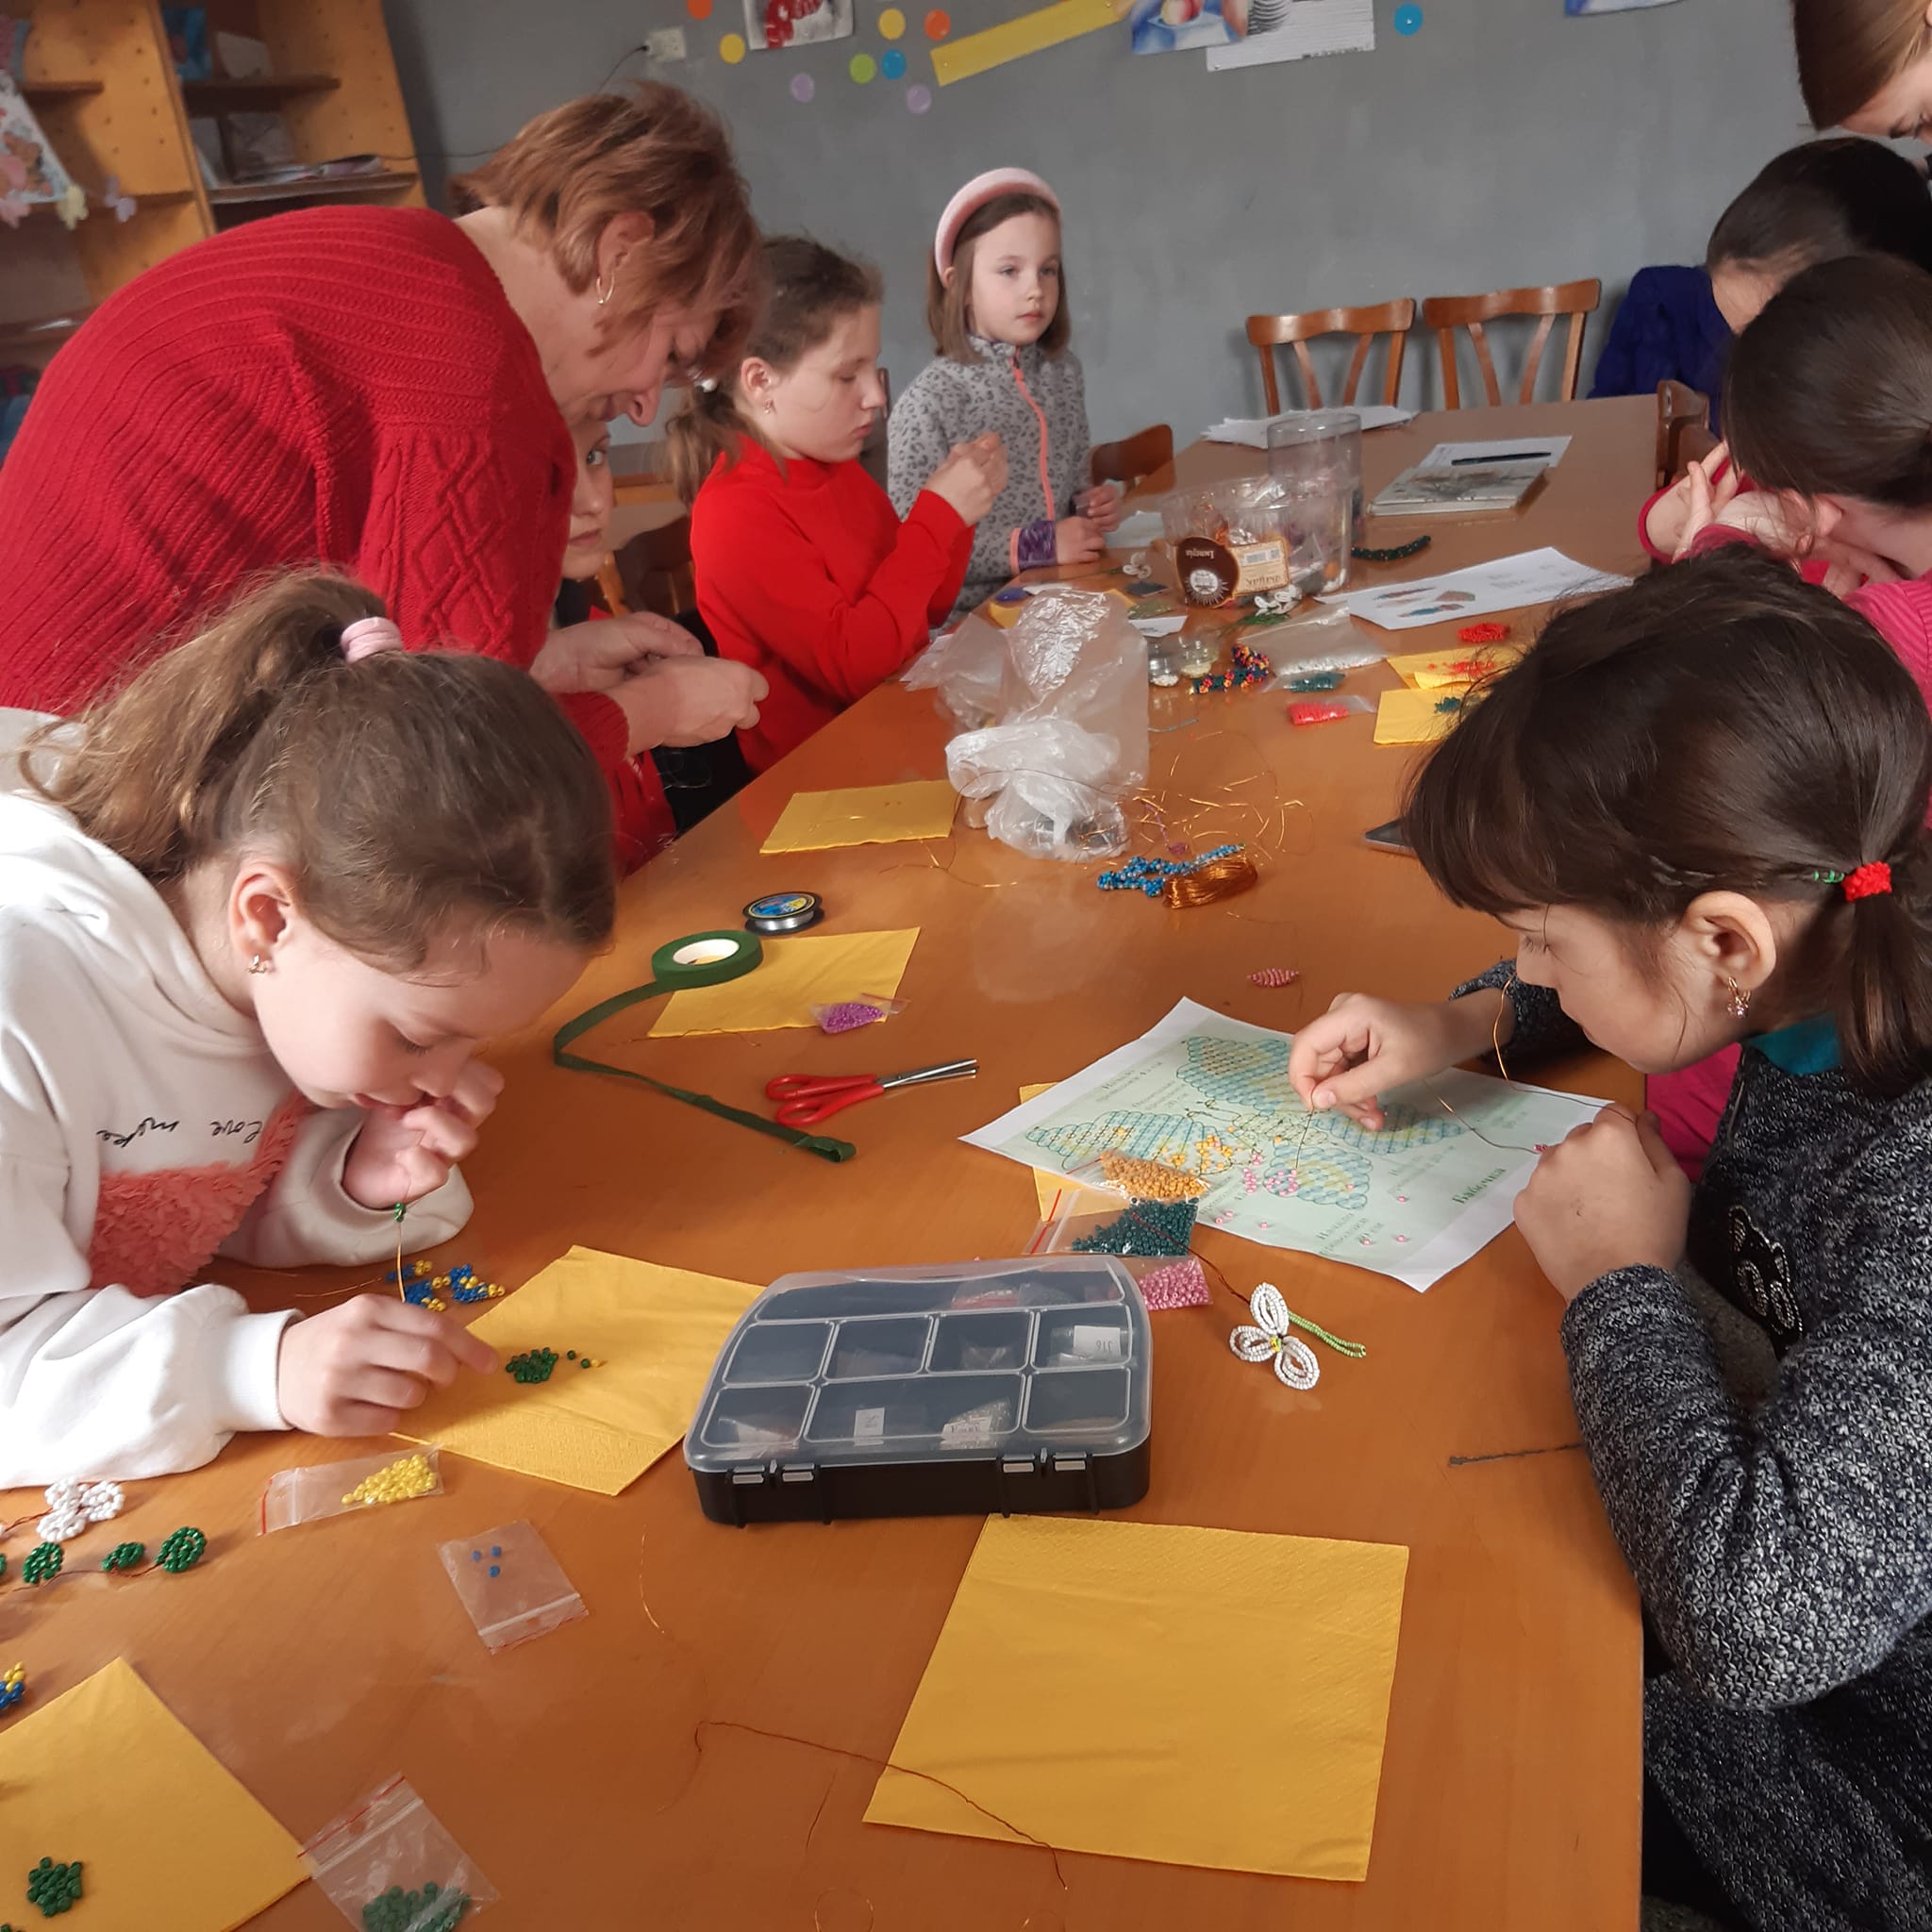 Activities at the Children’s and Youth Creativity Centre